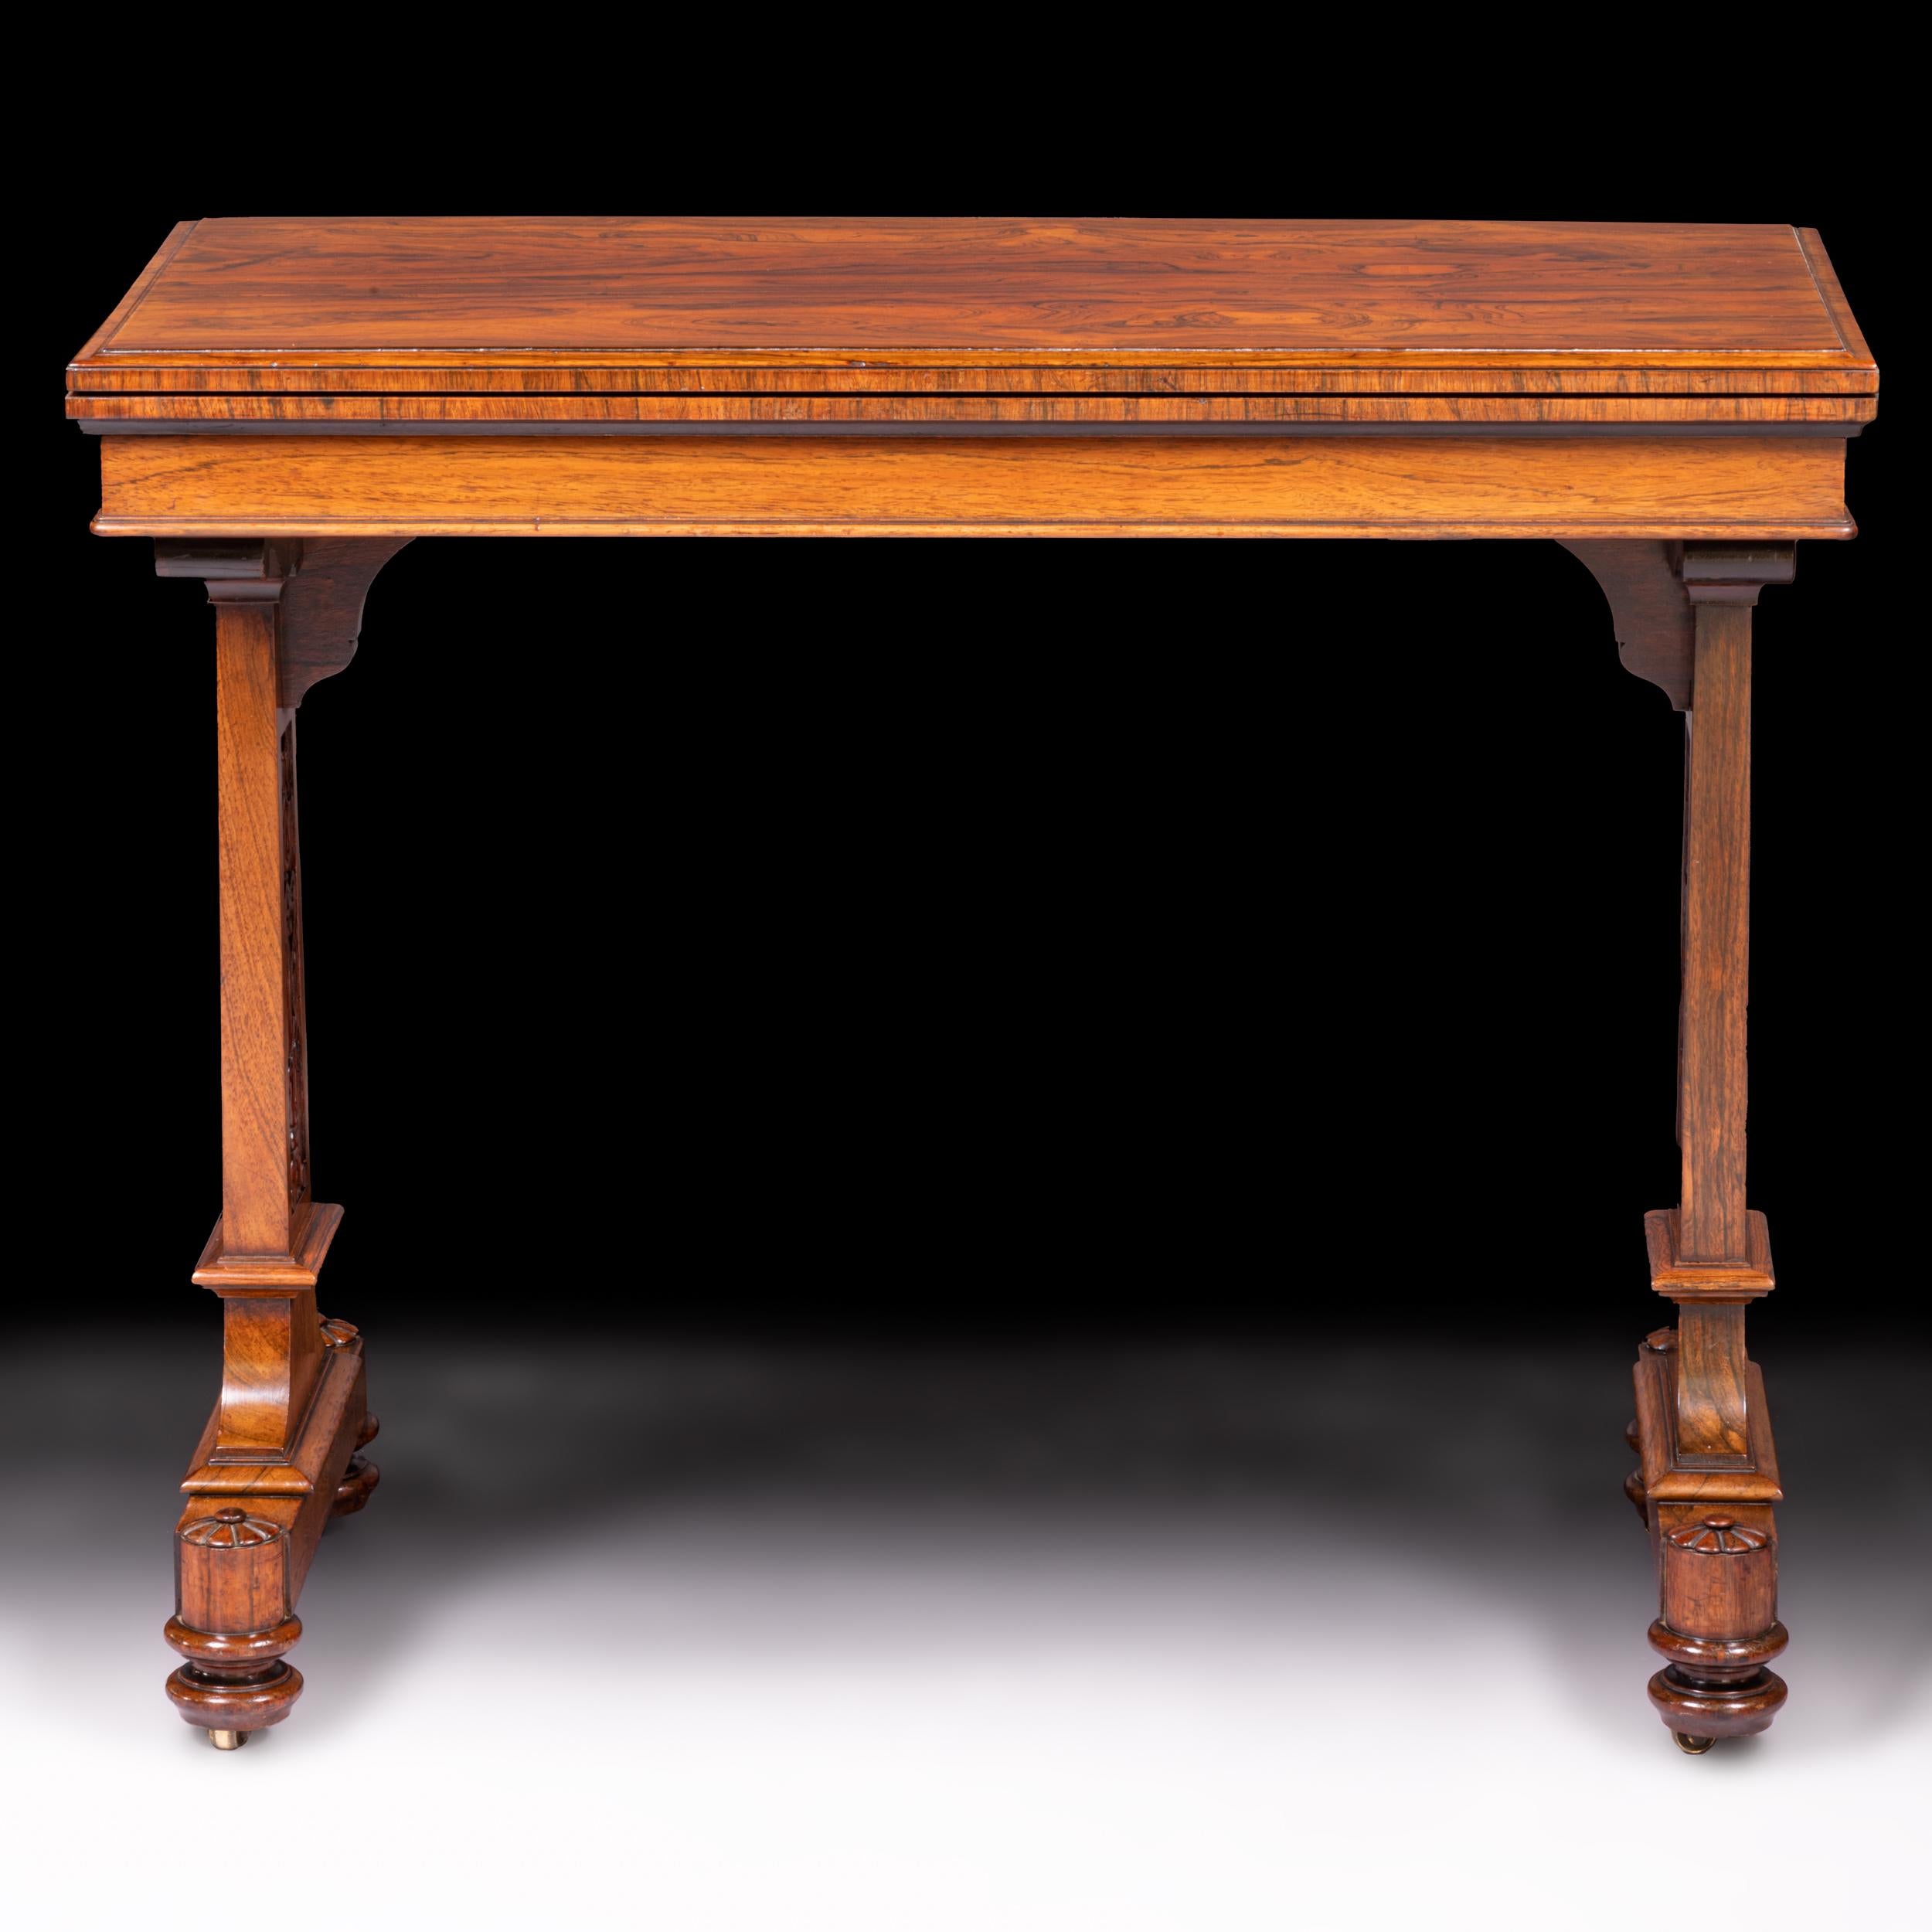 Early 19th Century English Regency Games Table by T & G Seddon In Excellent Condition For Sale In Dublin, IE